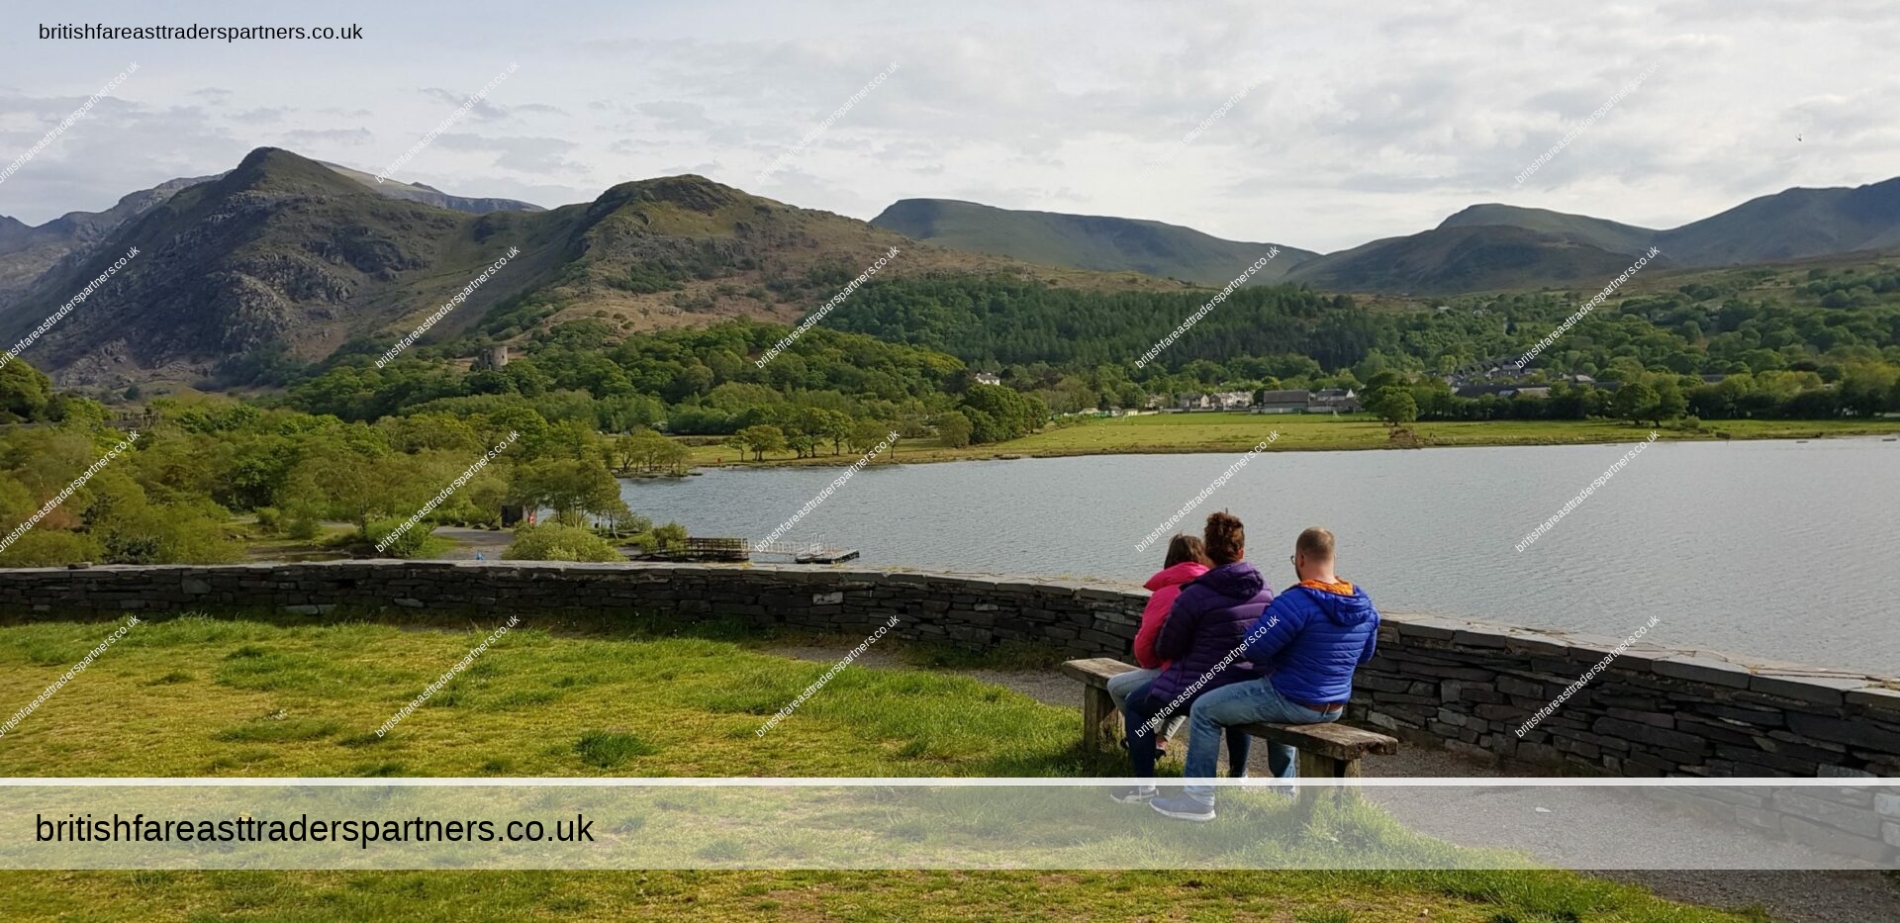 BEAUTIFUL PLACES TO VISIT IN WALES, UNITED KINGDOM: VILLAGE OF LLANBERIS IN SNOWDONIA NATIONAL PARK WALKS | NATURE | DAYS OUT | TRAVEL | TOURISM | LEISURE | UNWIND | WELLBEING